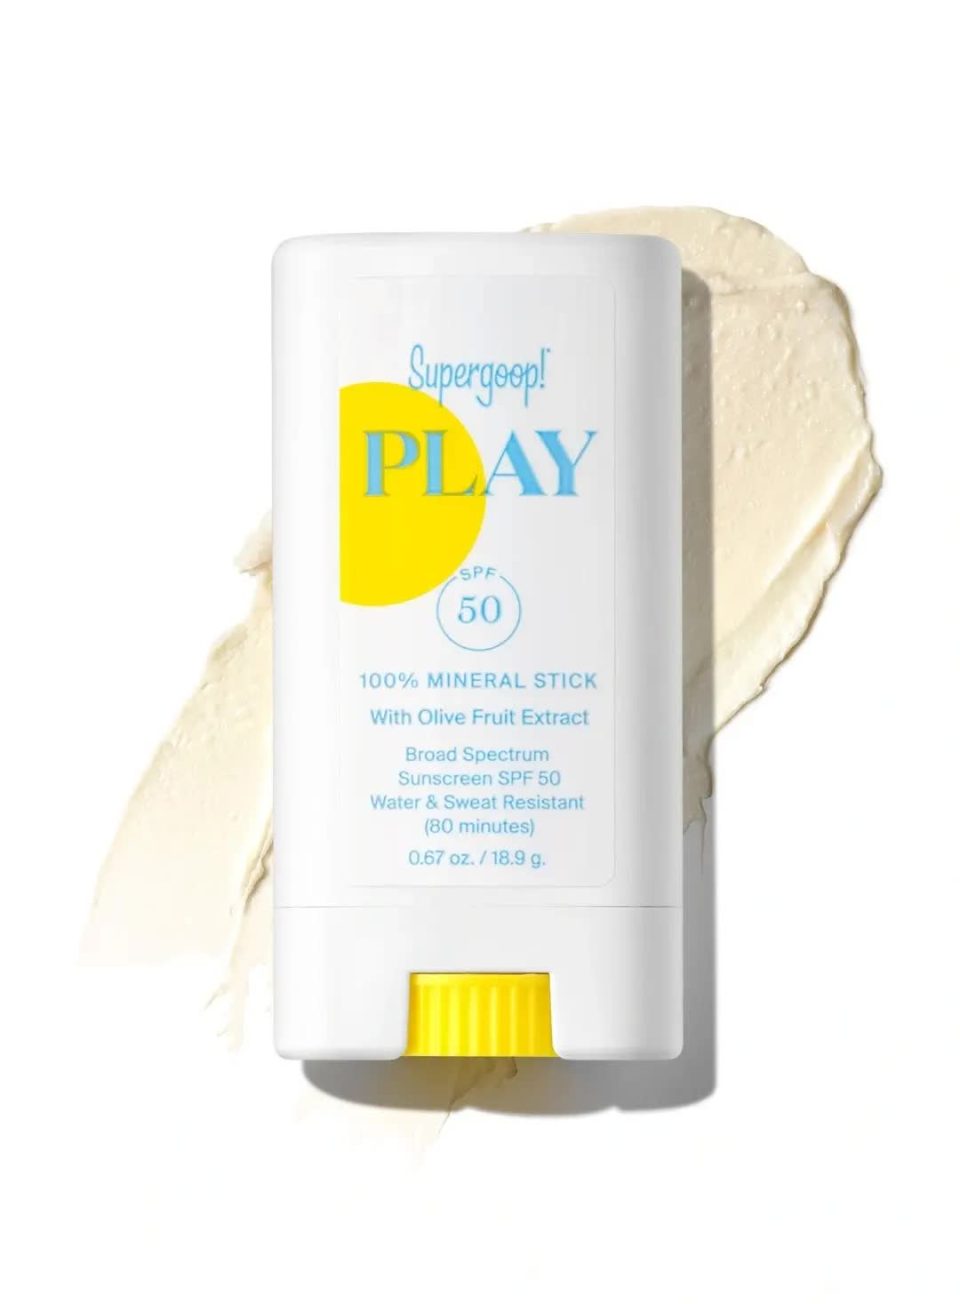 supergoop-play-100_-mineral-stick-spf-50-with-olive-fruit-extract-pack-and-texture